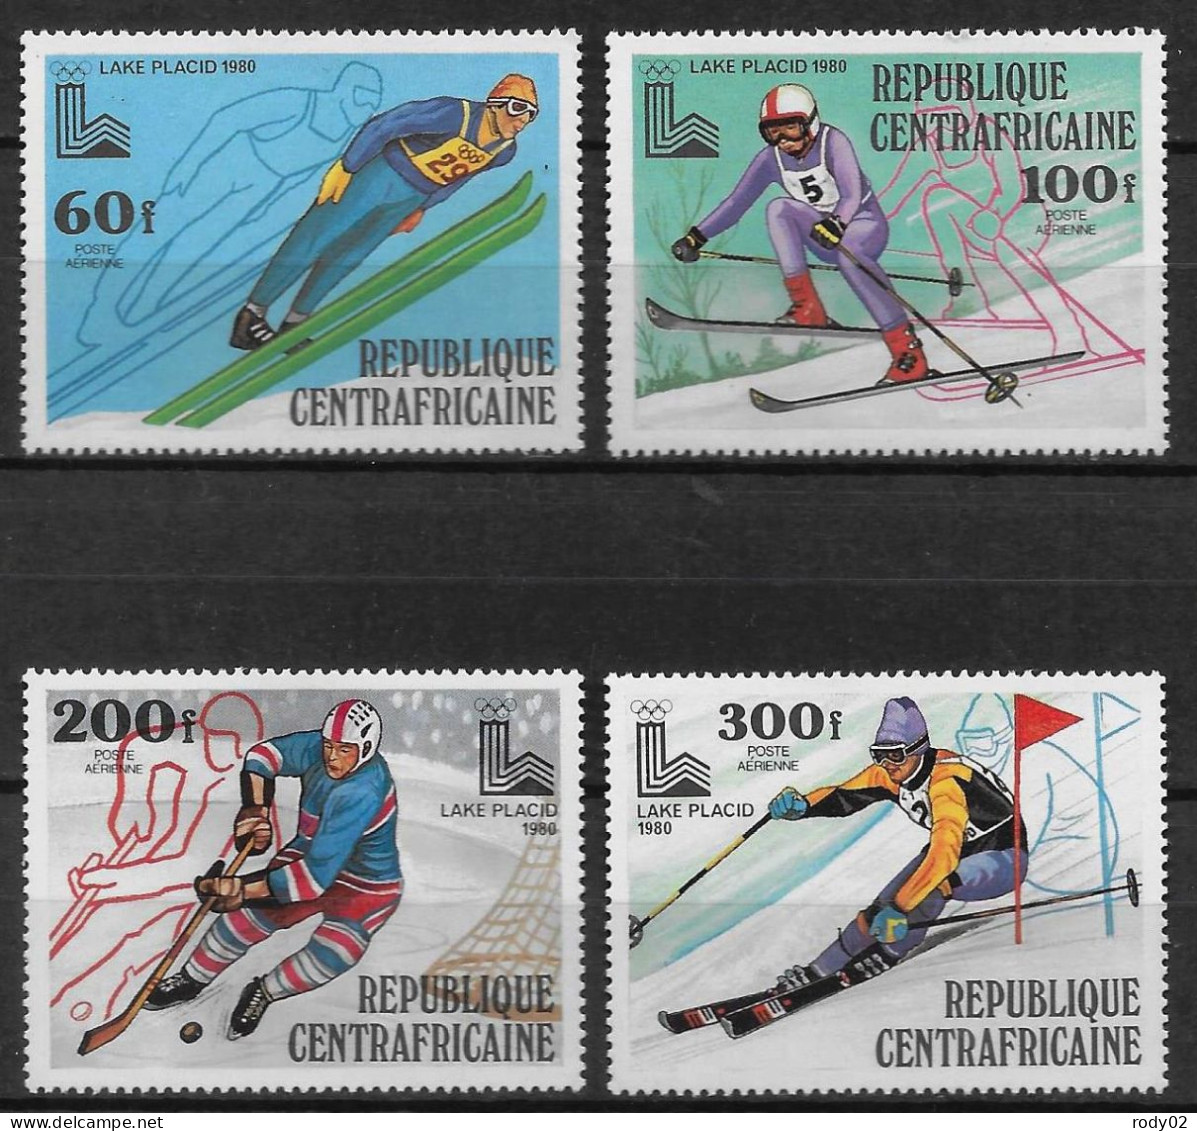 CENTRAFRIQUE - JEUX OLYMPIQUES D'HIVER A LAKE PLACID - PA 208 A 211 ET BF 37 - NEUF** MNH - Invierno 1980: Lake Placid